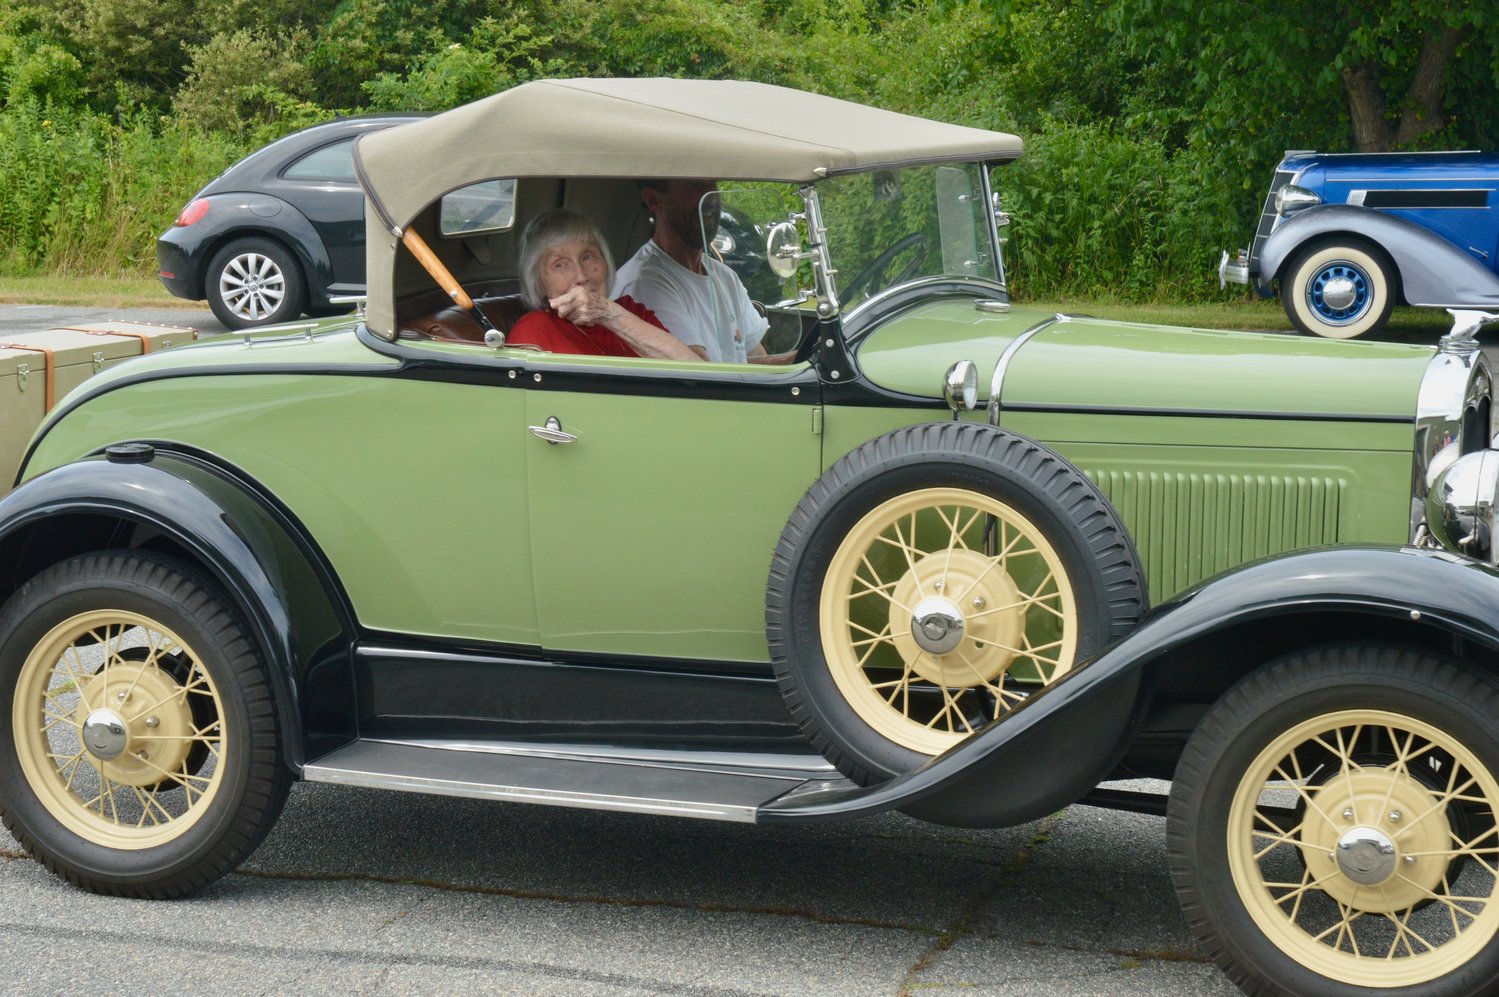 Mary Martin arrives to the surprise party in a 1931 Model A Ford, driven and owned by Bob Lantz.